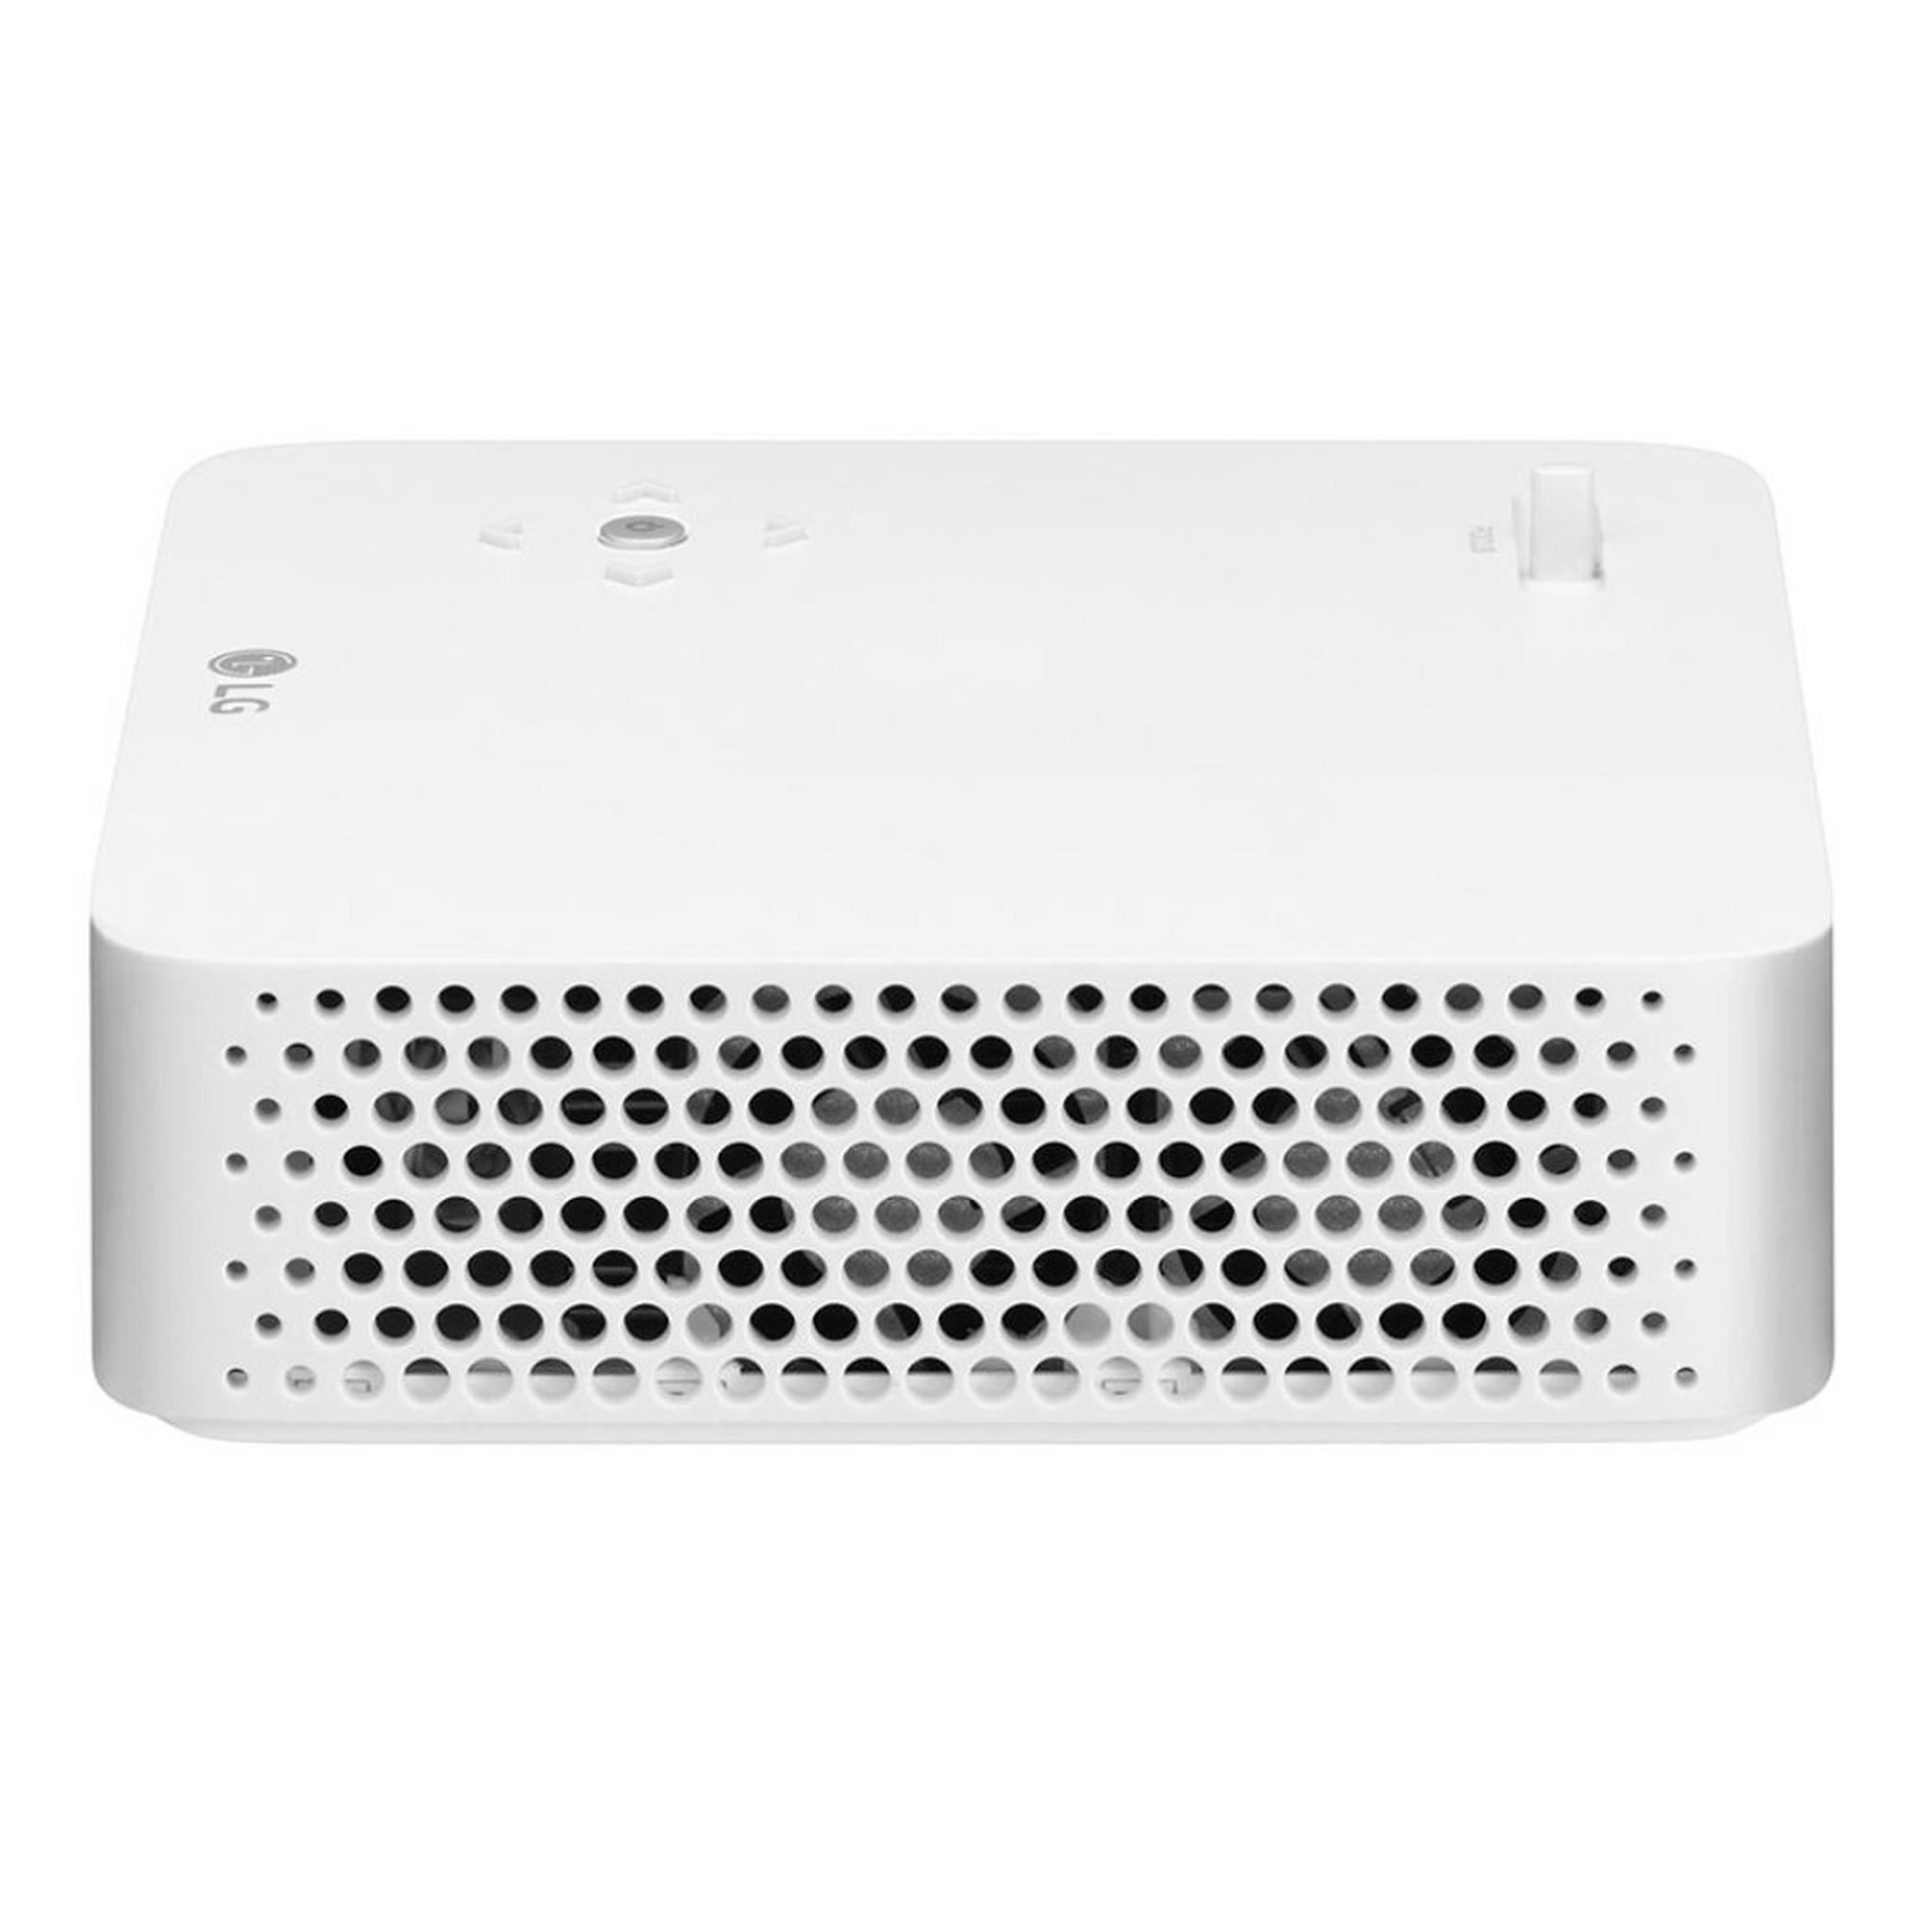 LG CineBeam 250L LED Projector - White